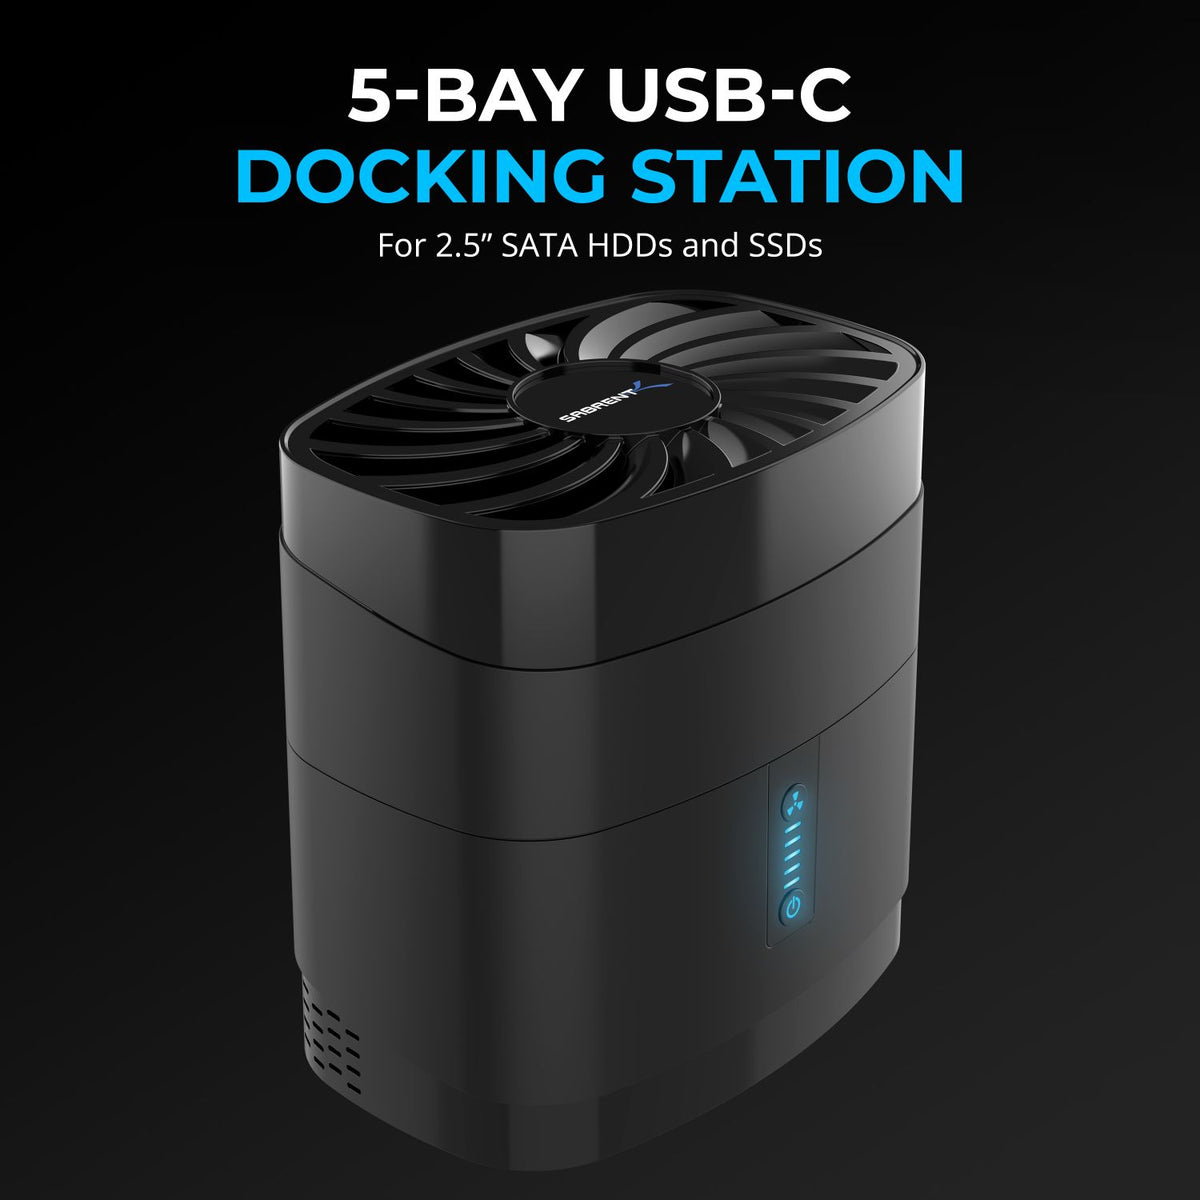 5-Bay USB-C Docking Station for 2.5” SATA HDDs and SSDs